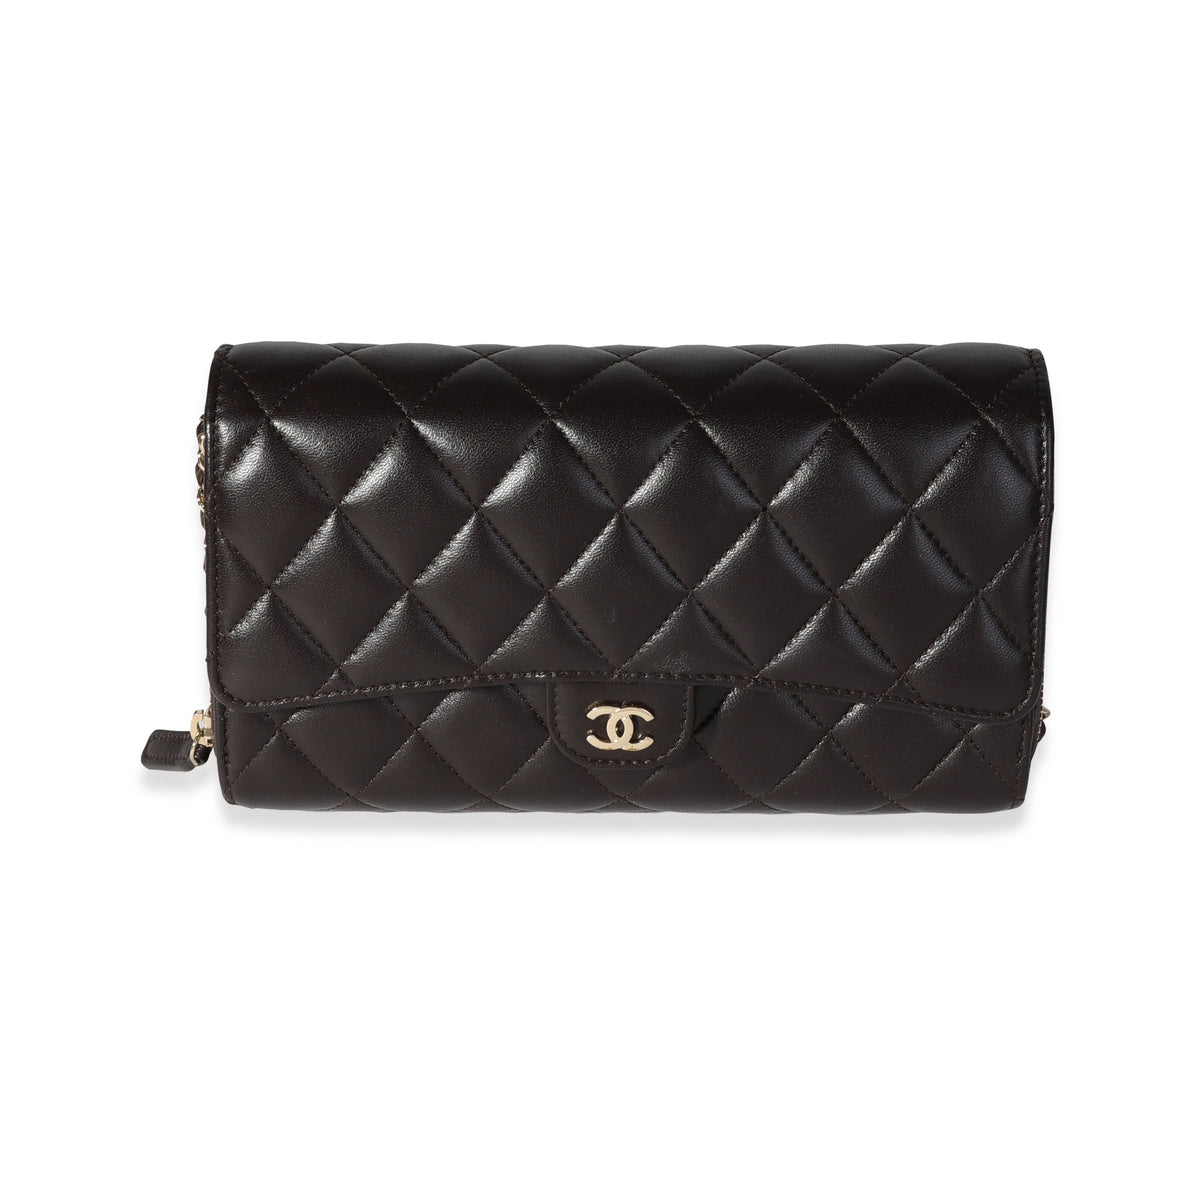 Chanel Brown Quilted Lambskin Chain Wallet